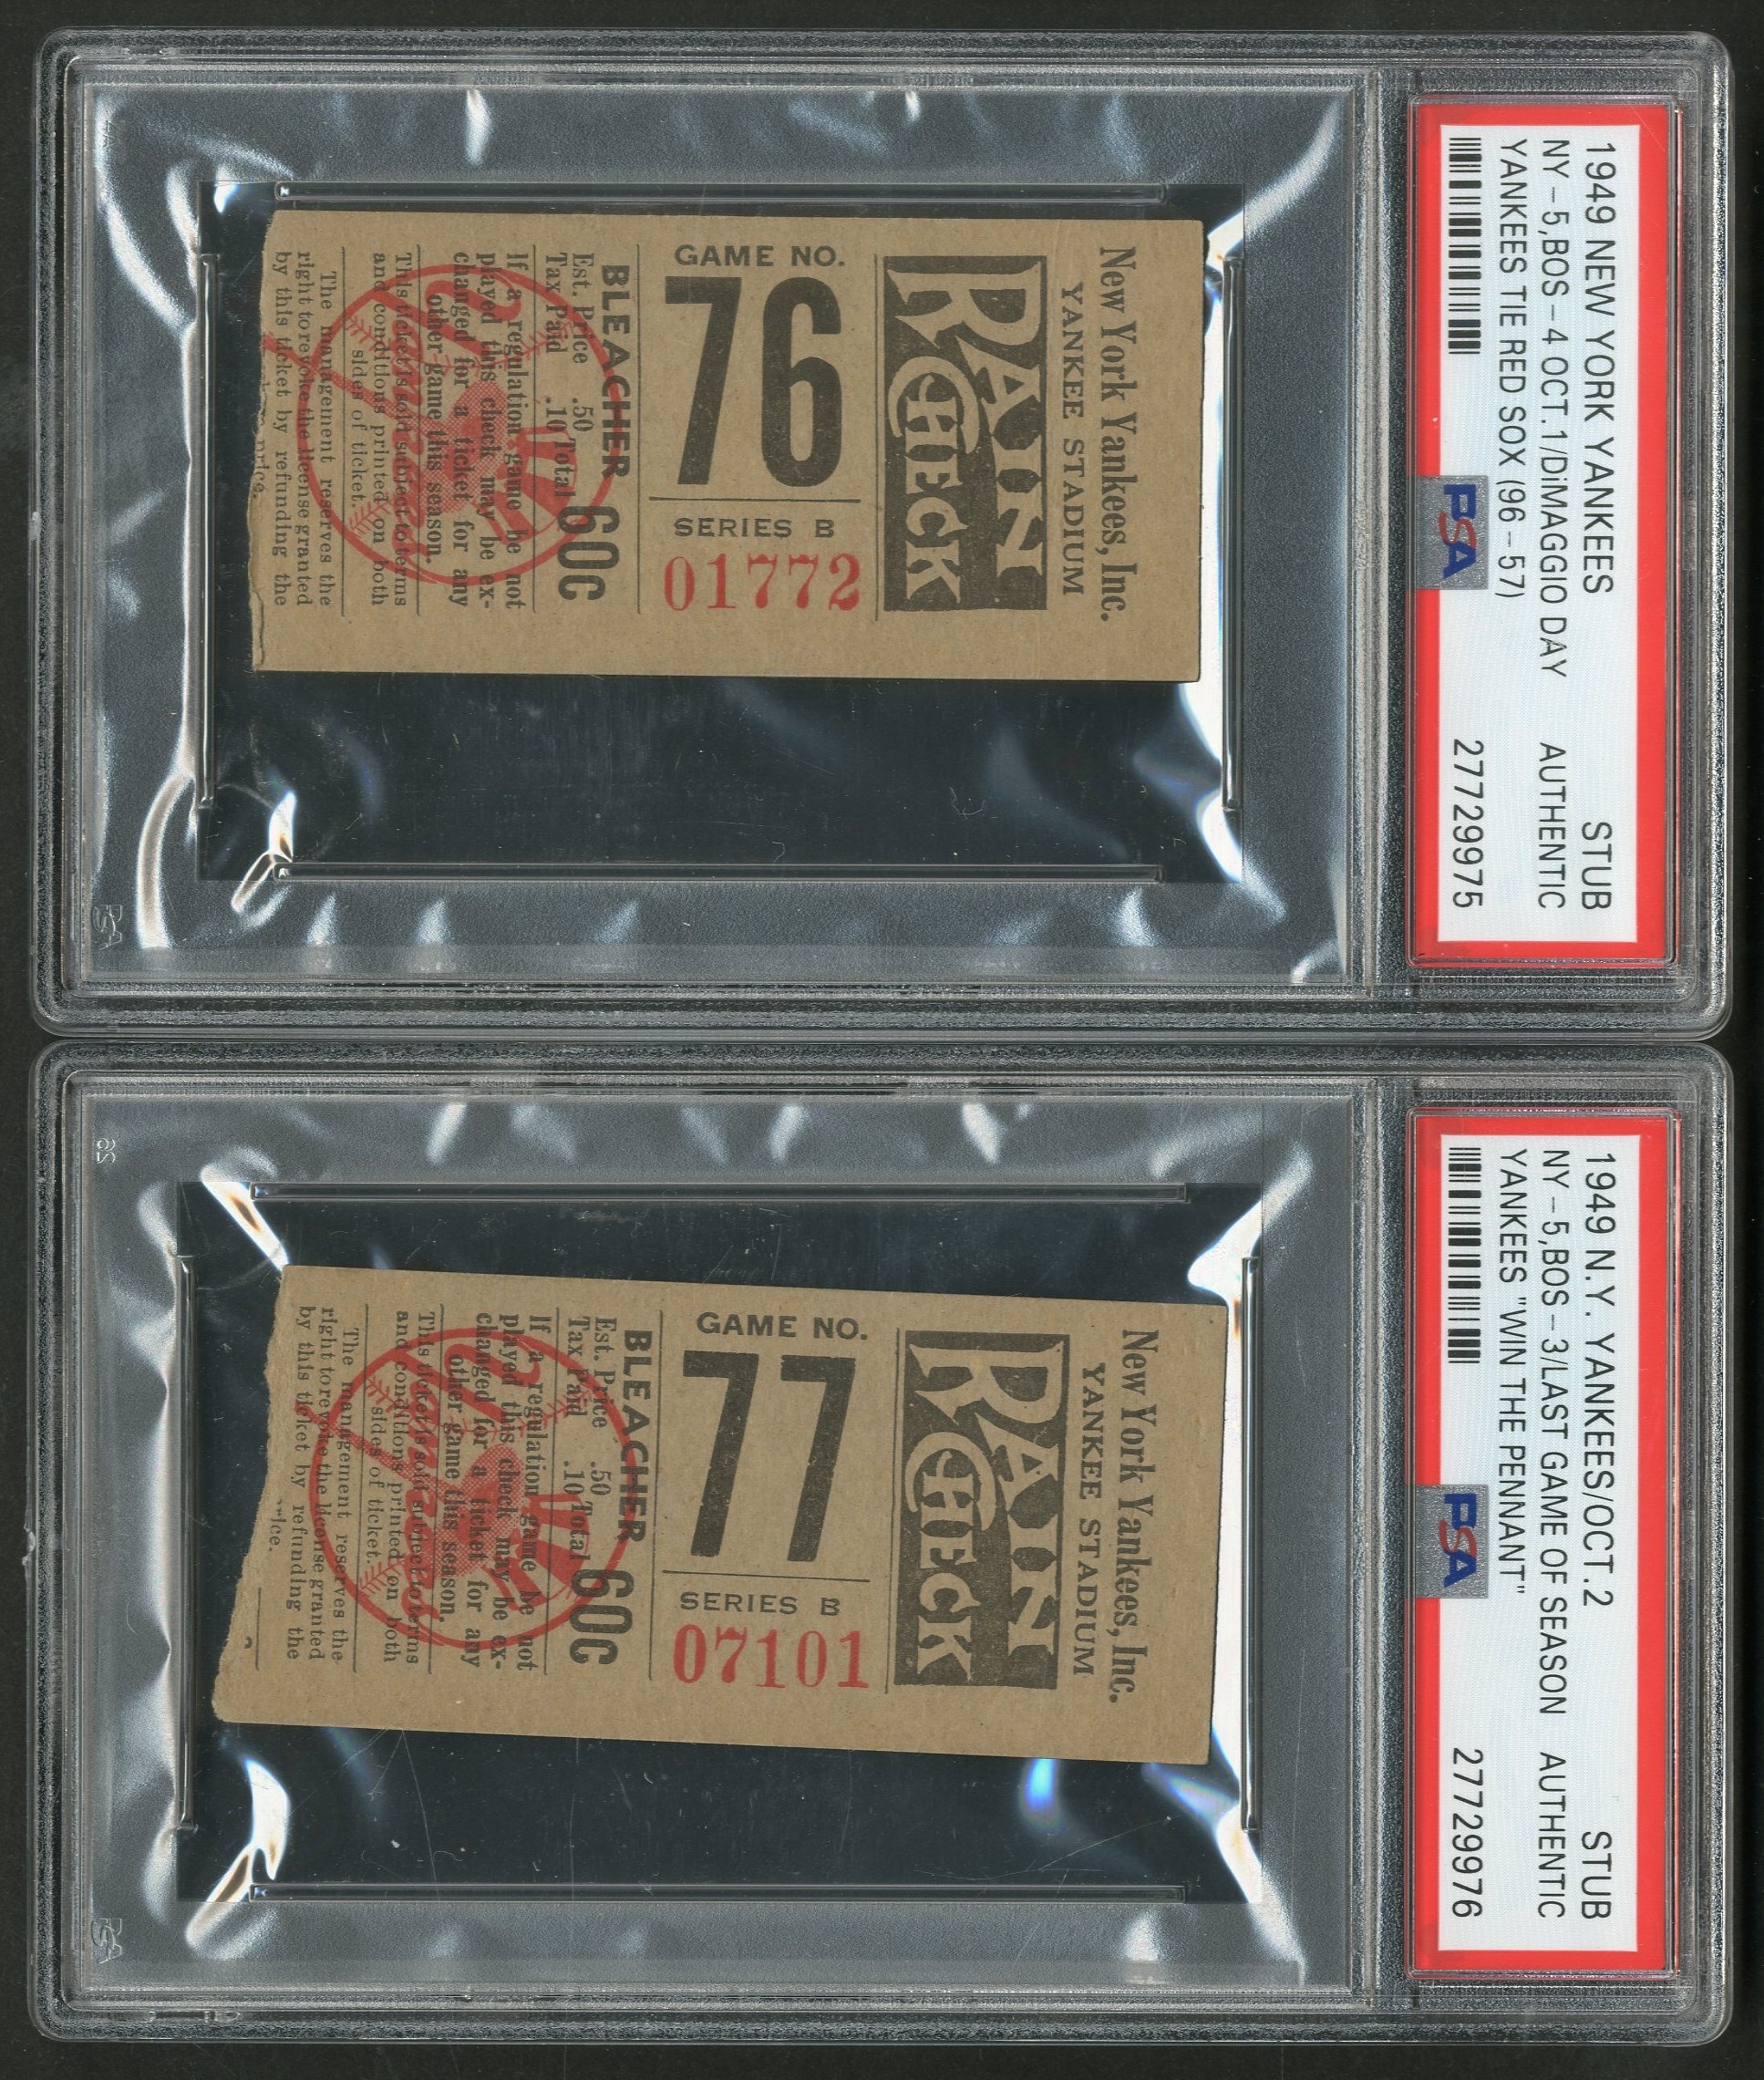 NY Yankees, Giants & Mets - Important 1949 New York Yankees Tie Red Sox & Yankees "Win the Pennant" Ticket Stubs - DiMaggio Day (PSA)